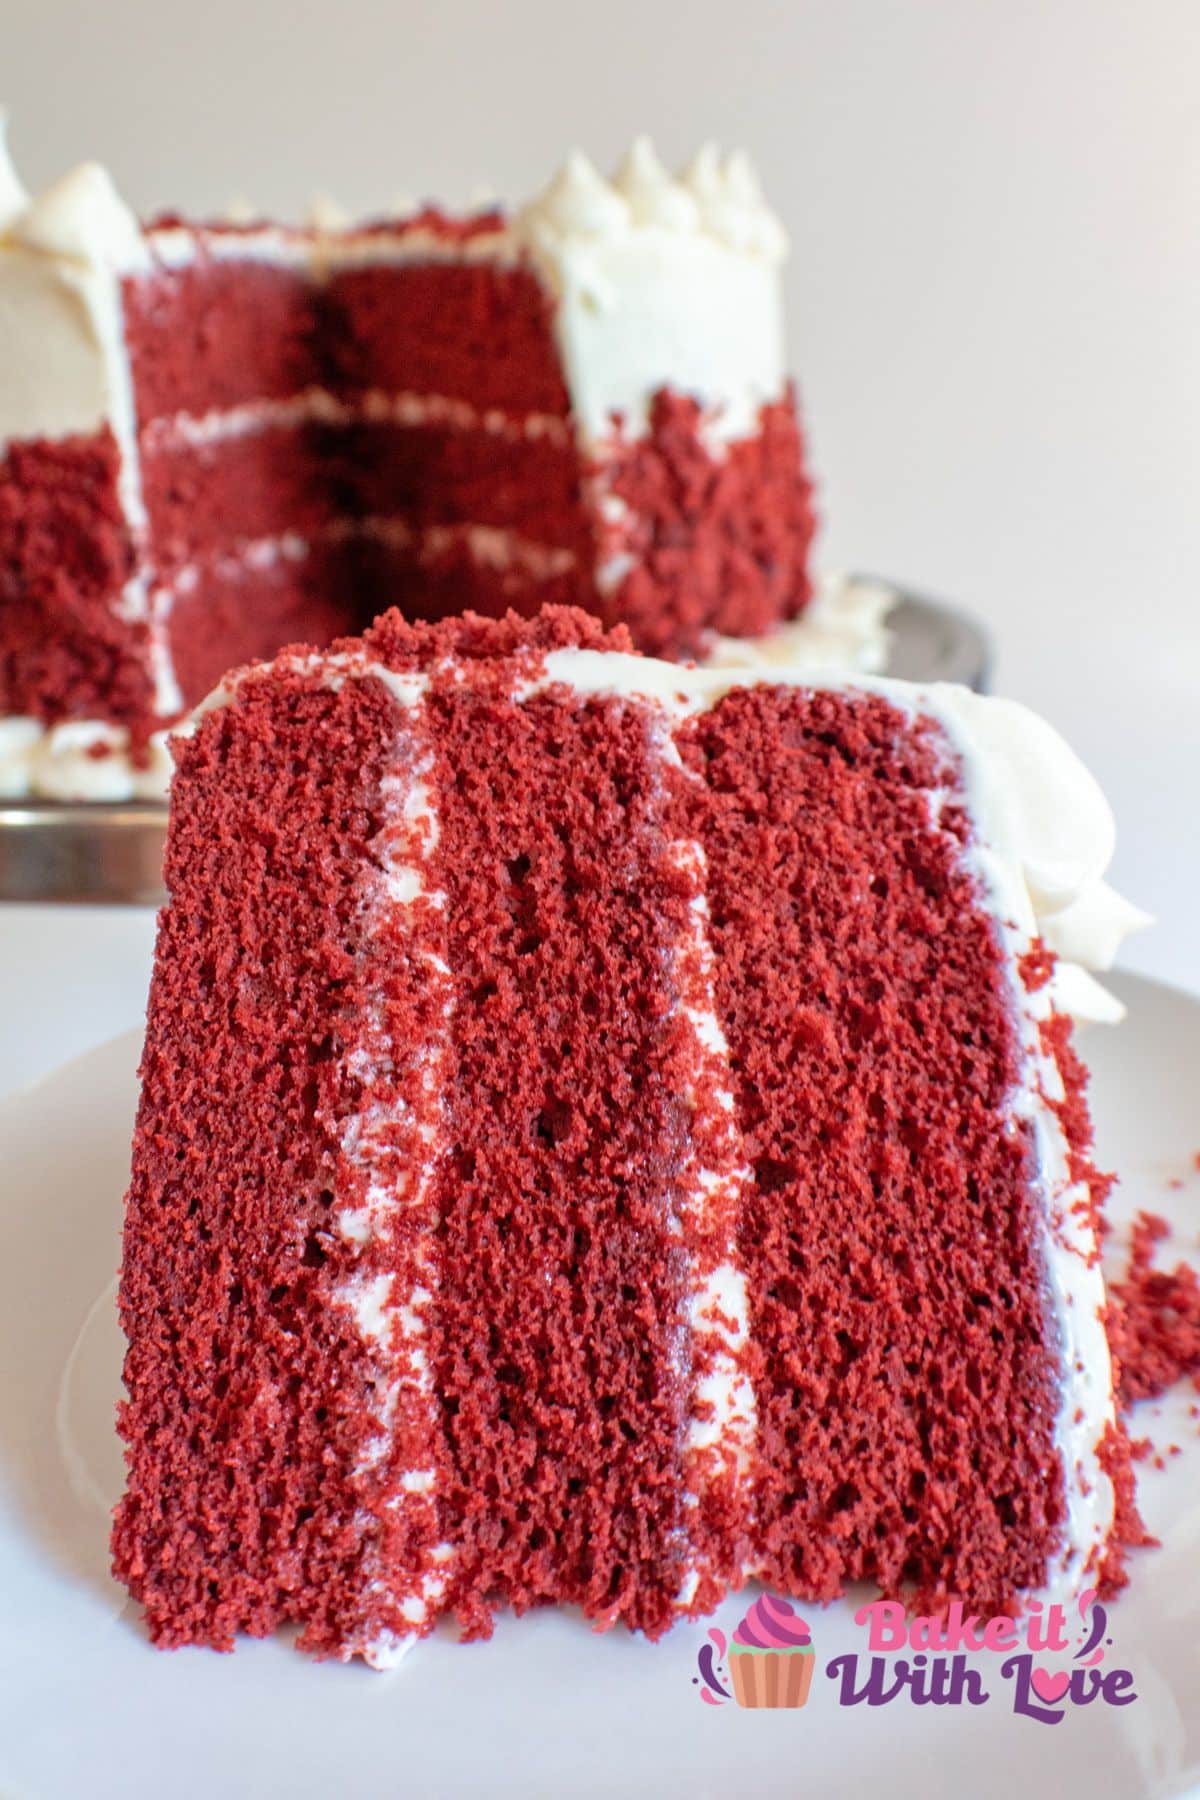 Tall image of red velvet cake with cream cheese frosting.